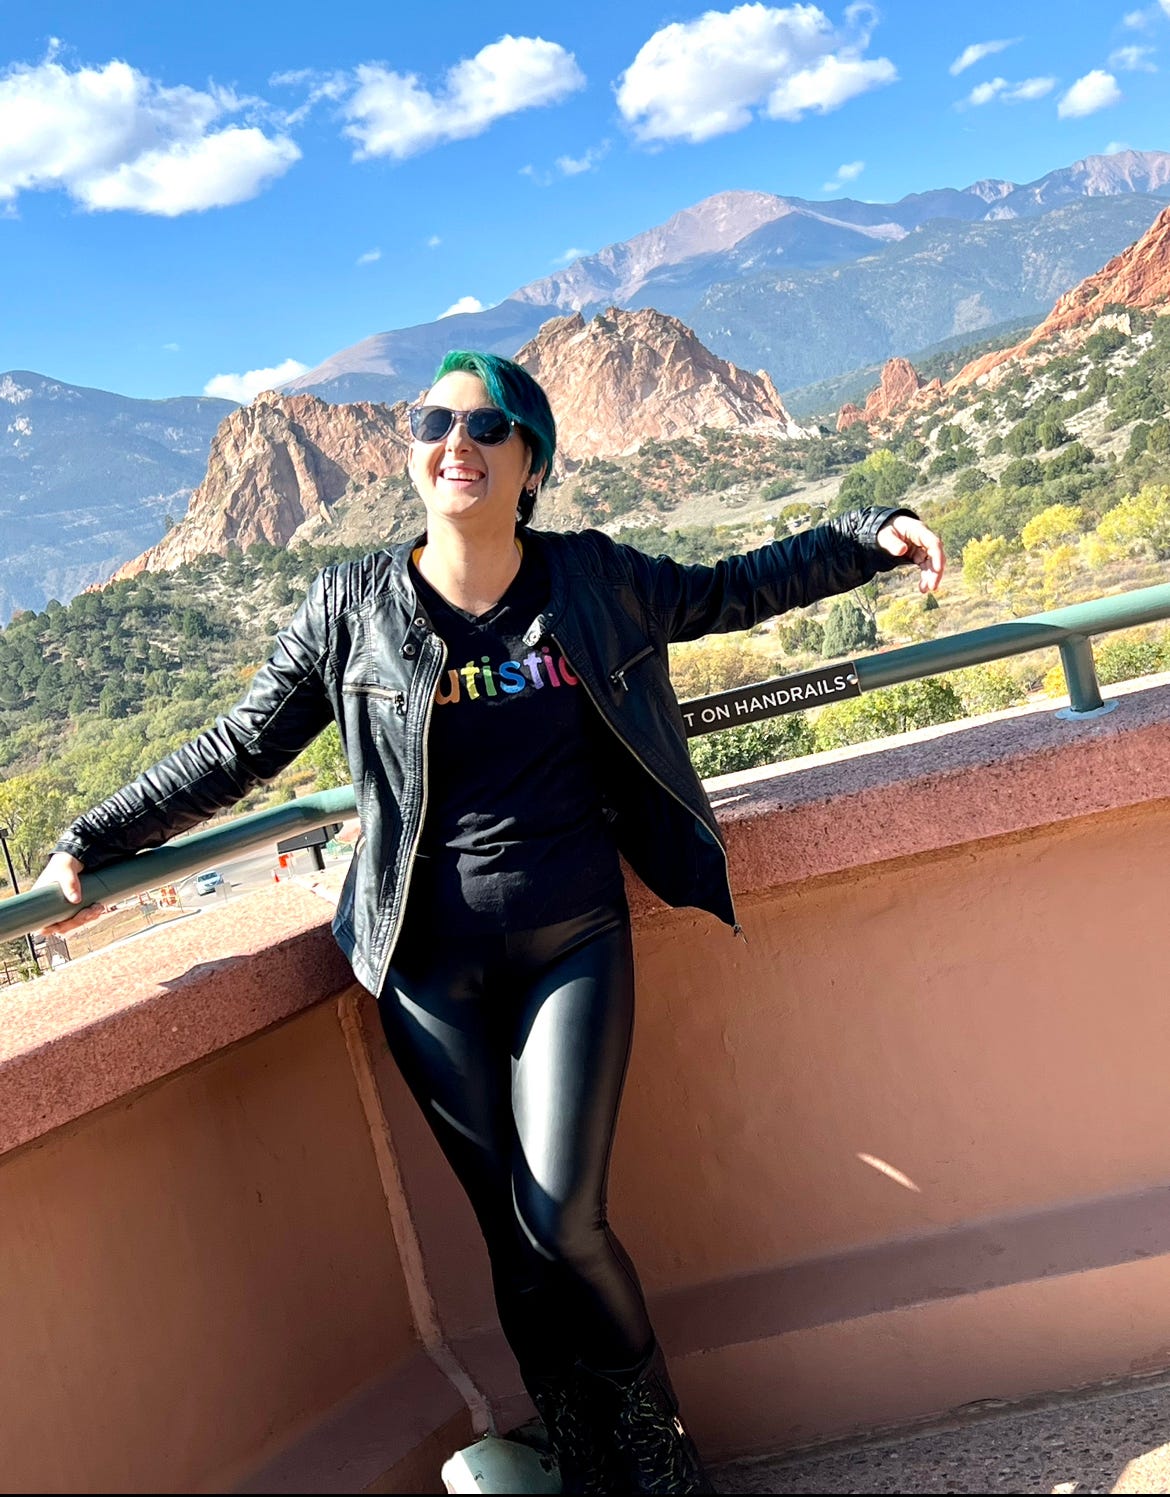 Lyric appears in all black. Leather jacket, leather pants, and tshirt with the word Autistic in a rainbow font. They are on a balcony, overlooking the Garden of the Gods Park